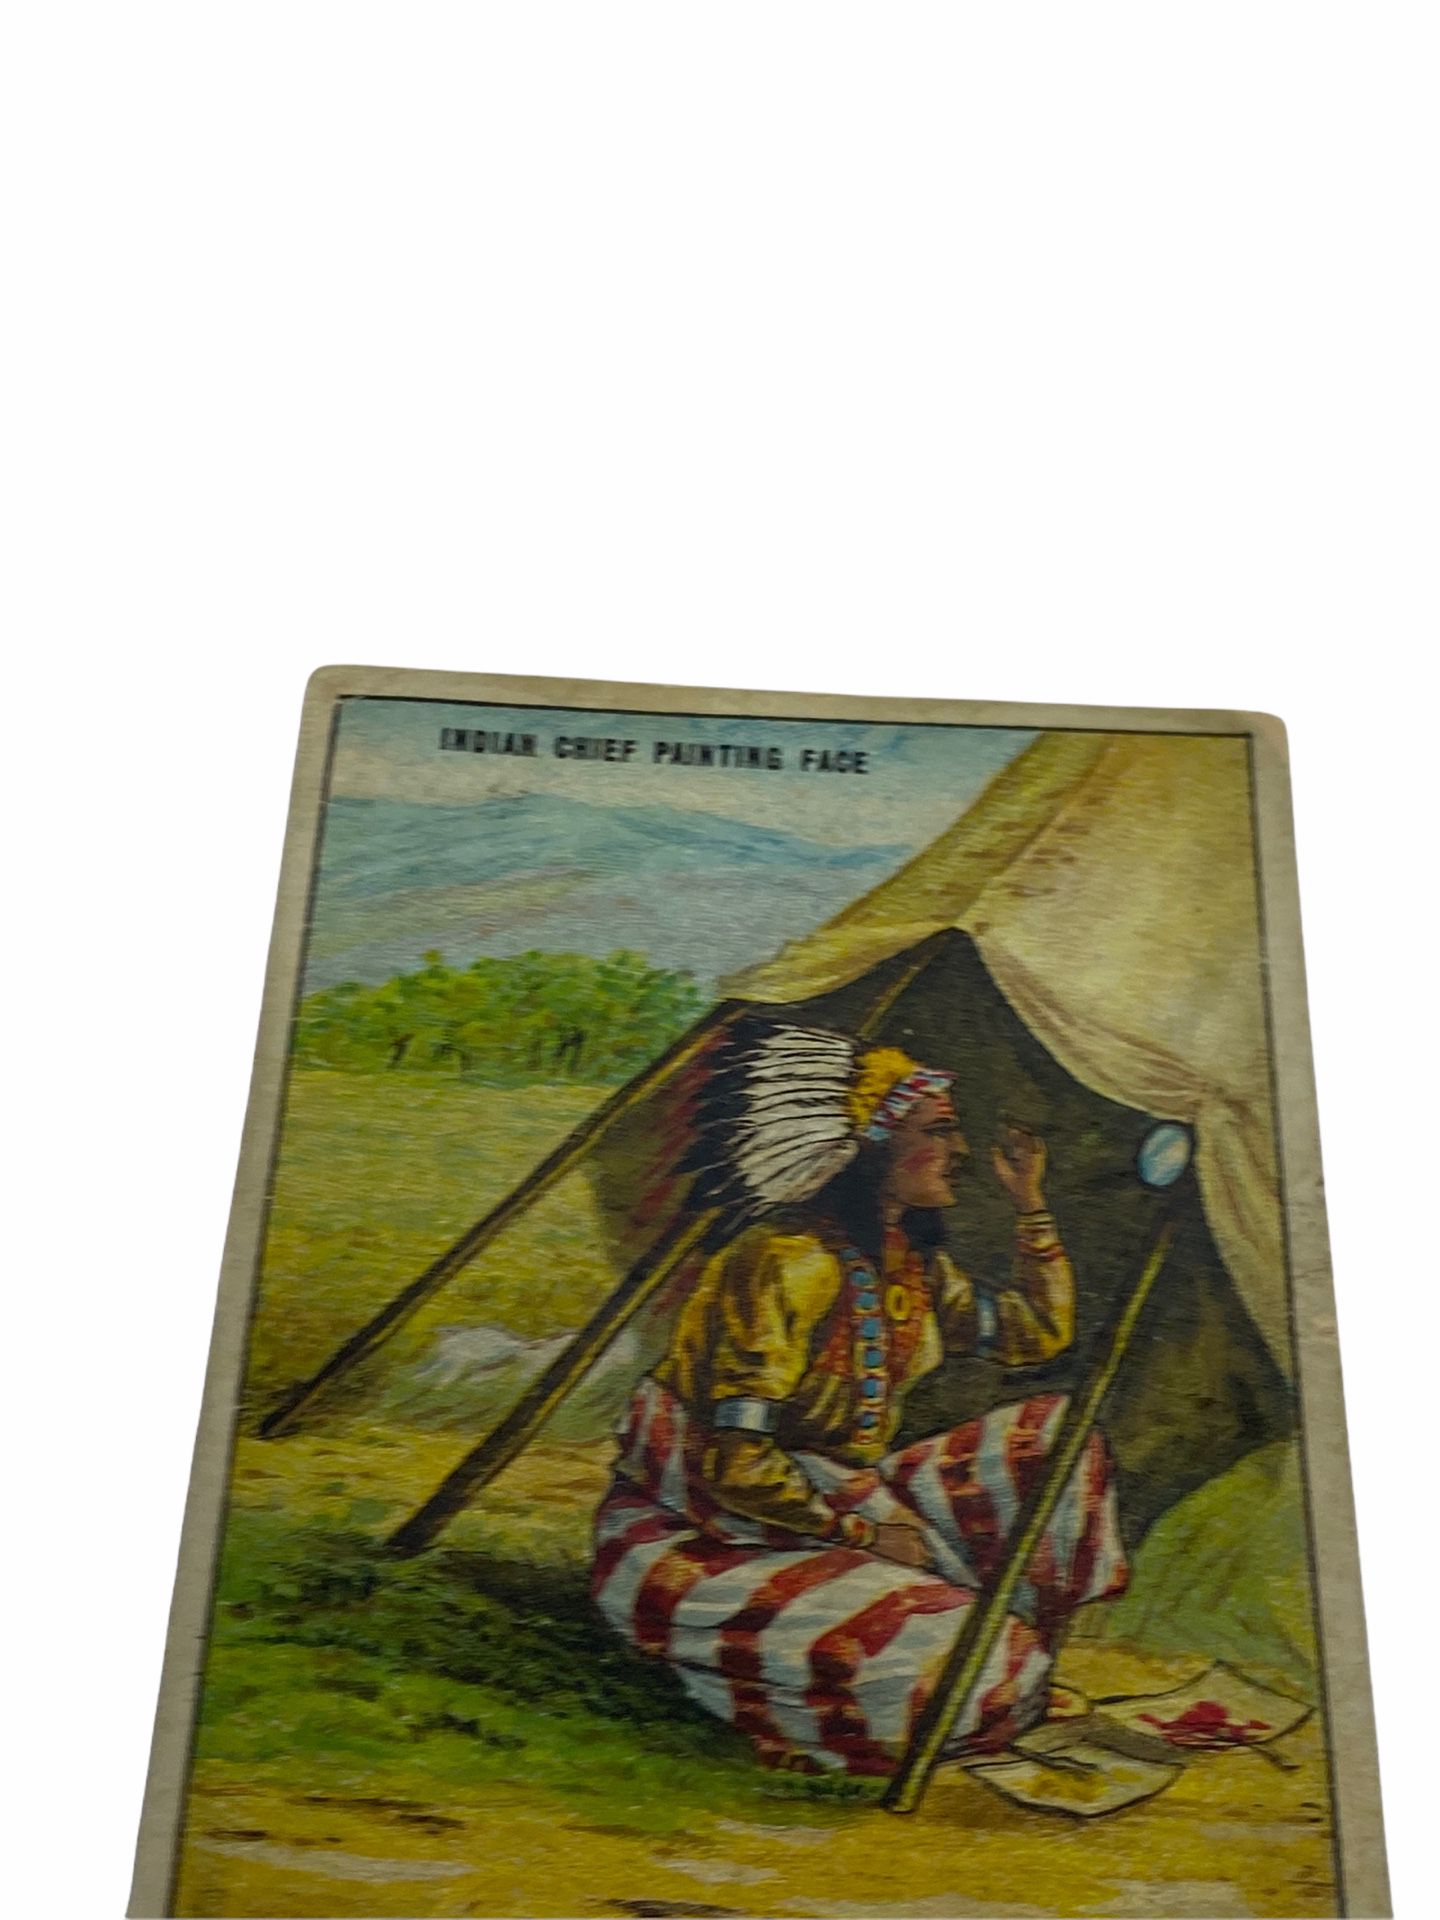 Rare 1910 U.S. Marine Tobacco Cigarette Trading Card Indian Chief Painting Face